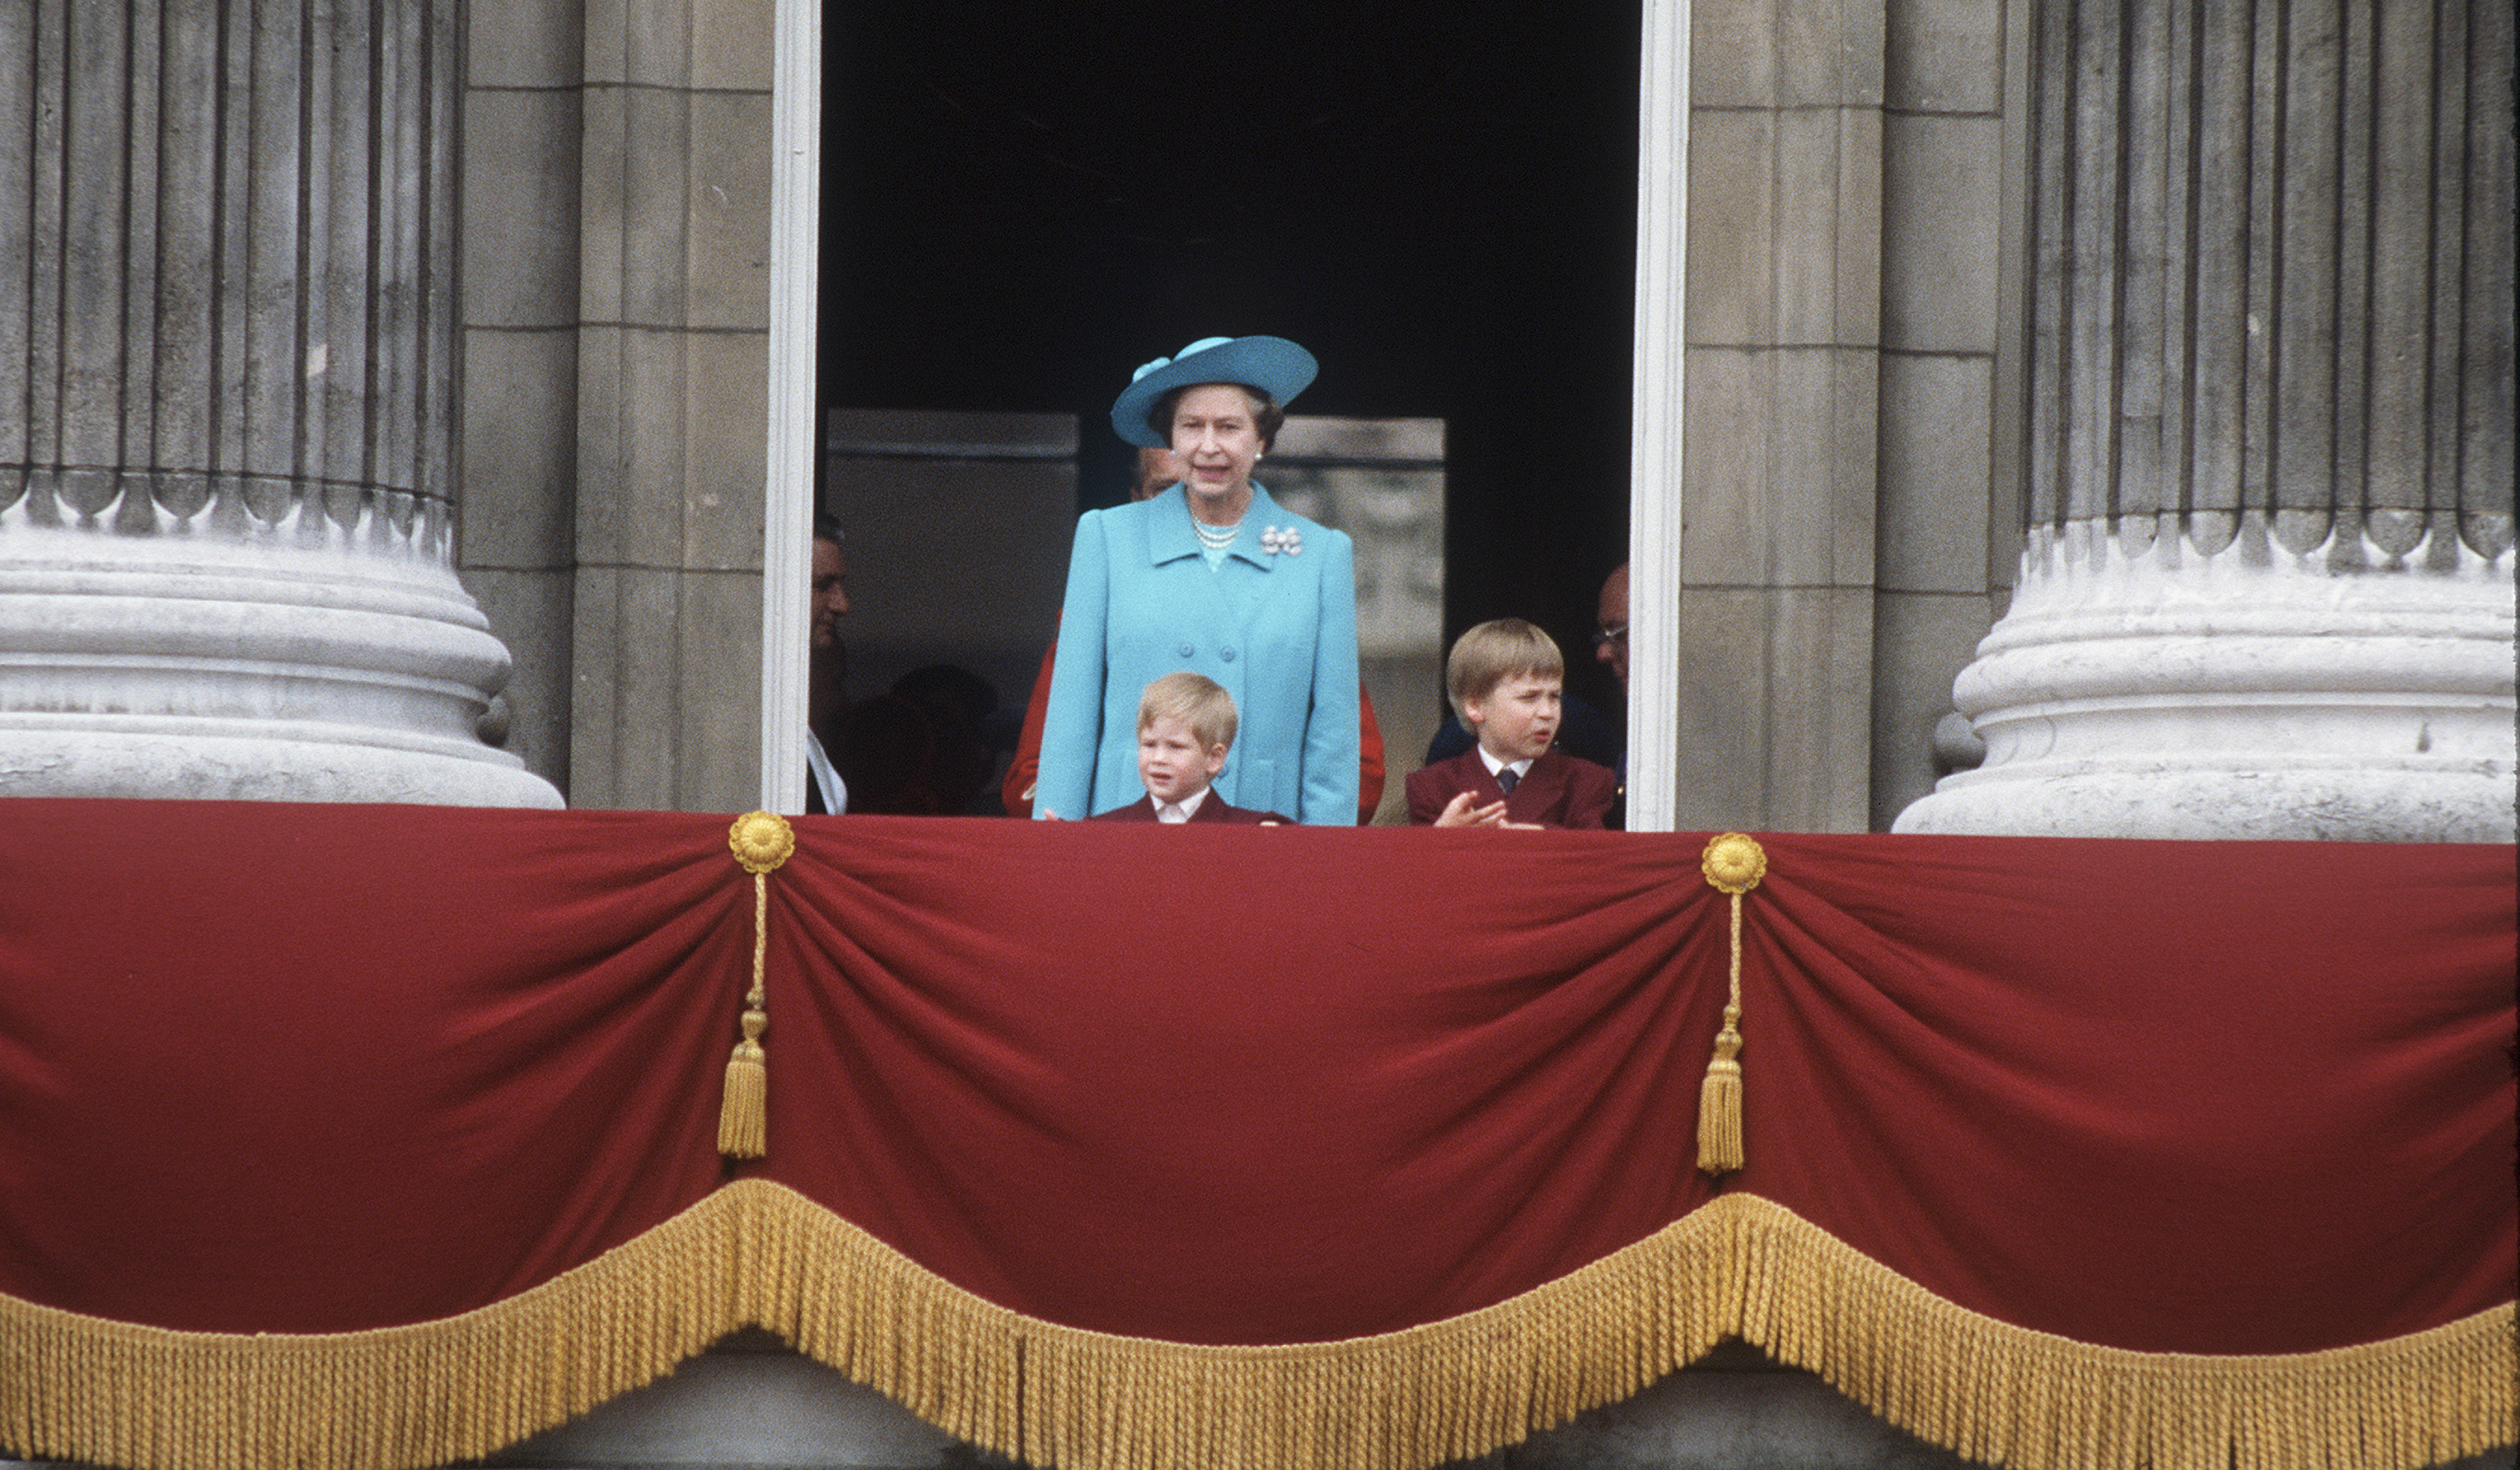 Queen Elizabeth II with the young Prince William and Prince Harry on the balcony of Buckingham Palace after the annual Trooping of the Colour ceremony in June, 1988. (Anwar Hussein—Getty Images)